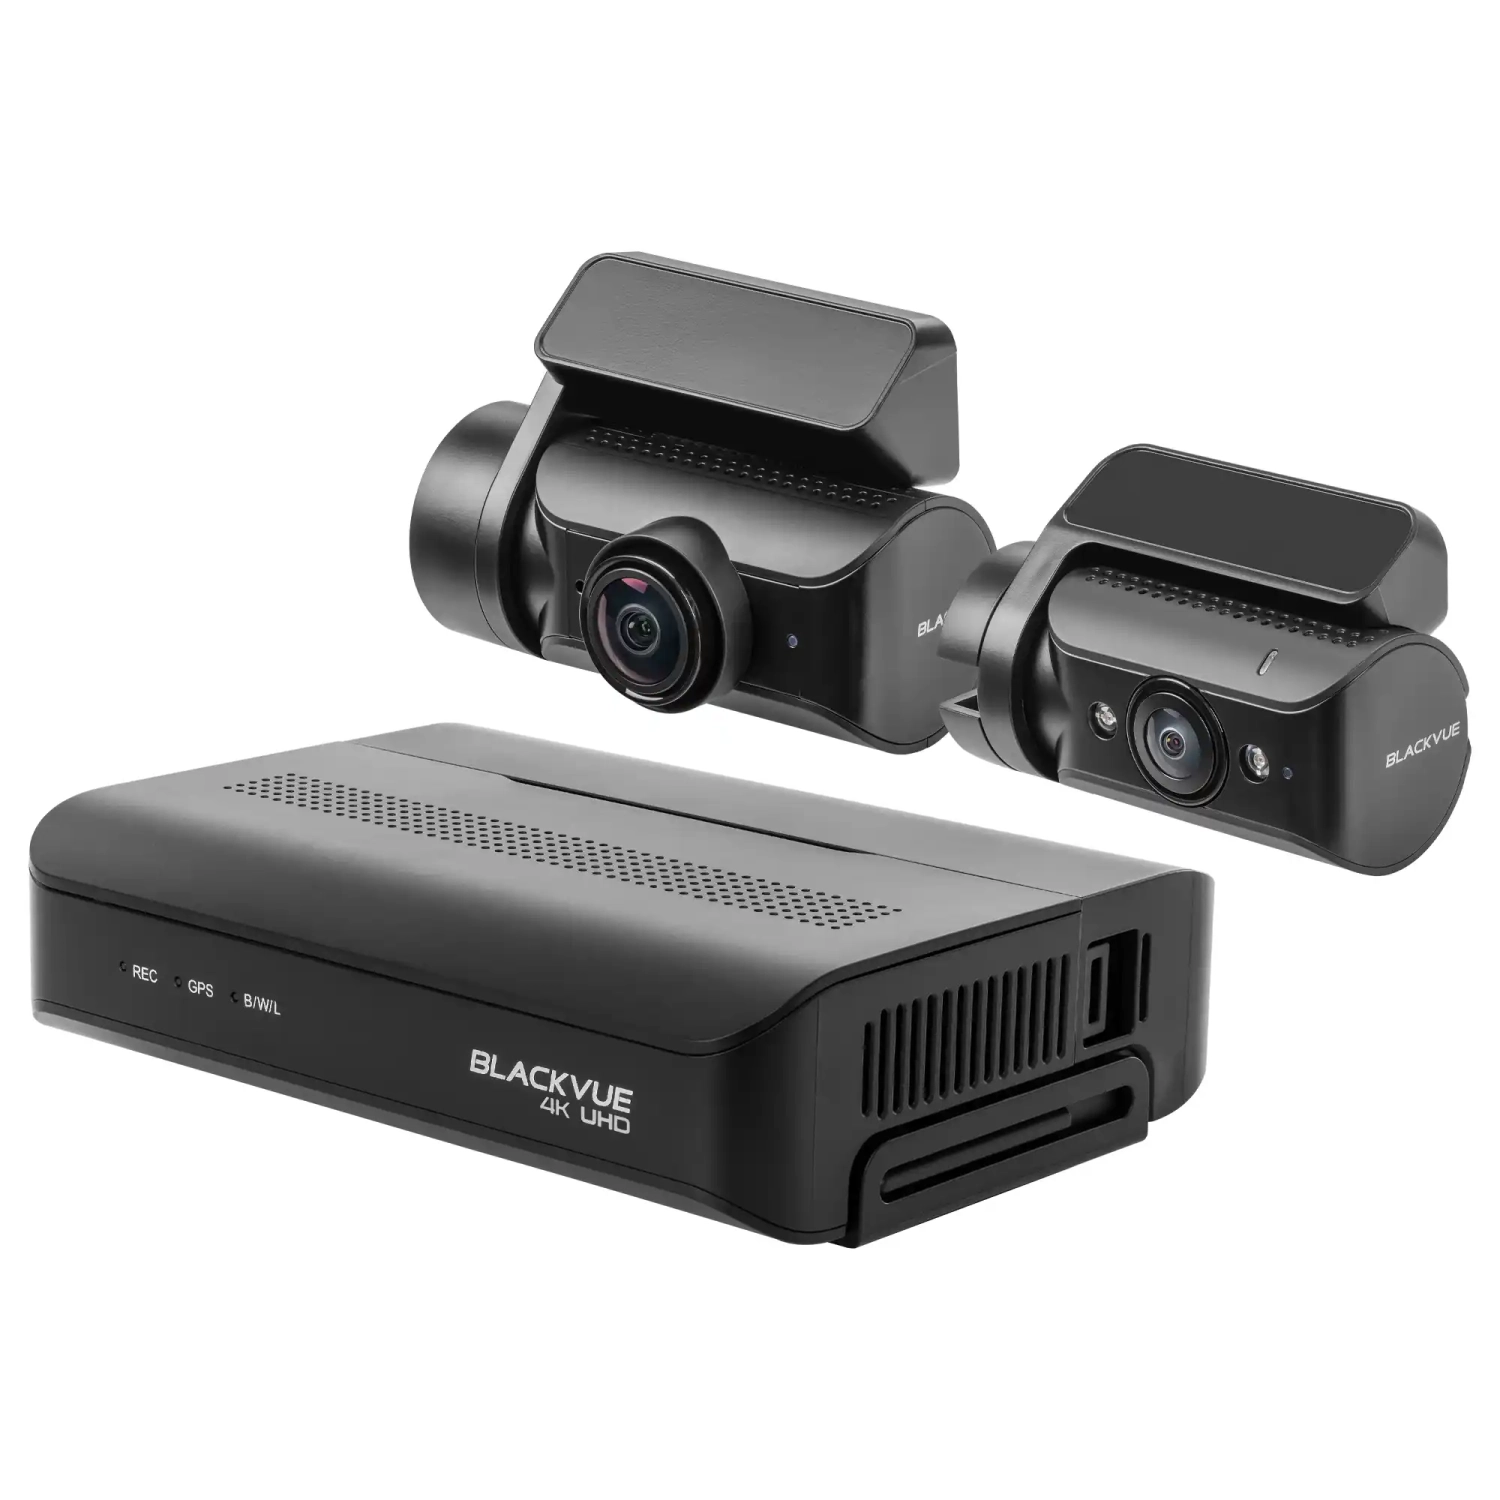 BlackVue Dash Cam Front and Inside DR970X-2CH Box IR Plus | 4K UHD Cloud Dashcam Front | Full HD 1080P Inside | Sony STARVIS 2 | Unbreakable Box Unit | Built-in Wi-Fi, GPS, Parking